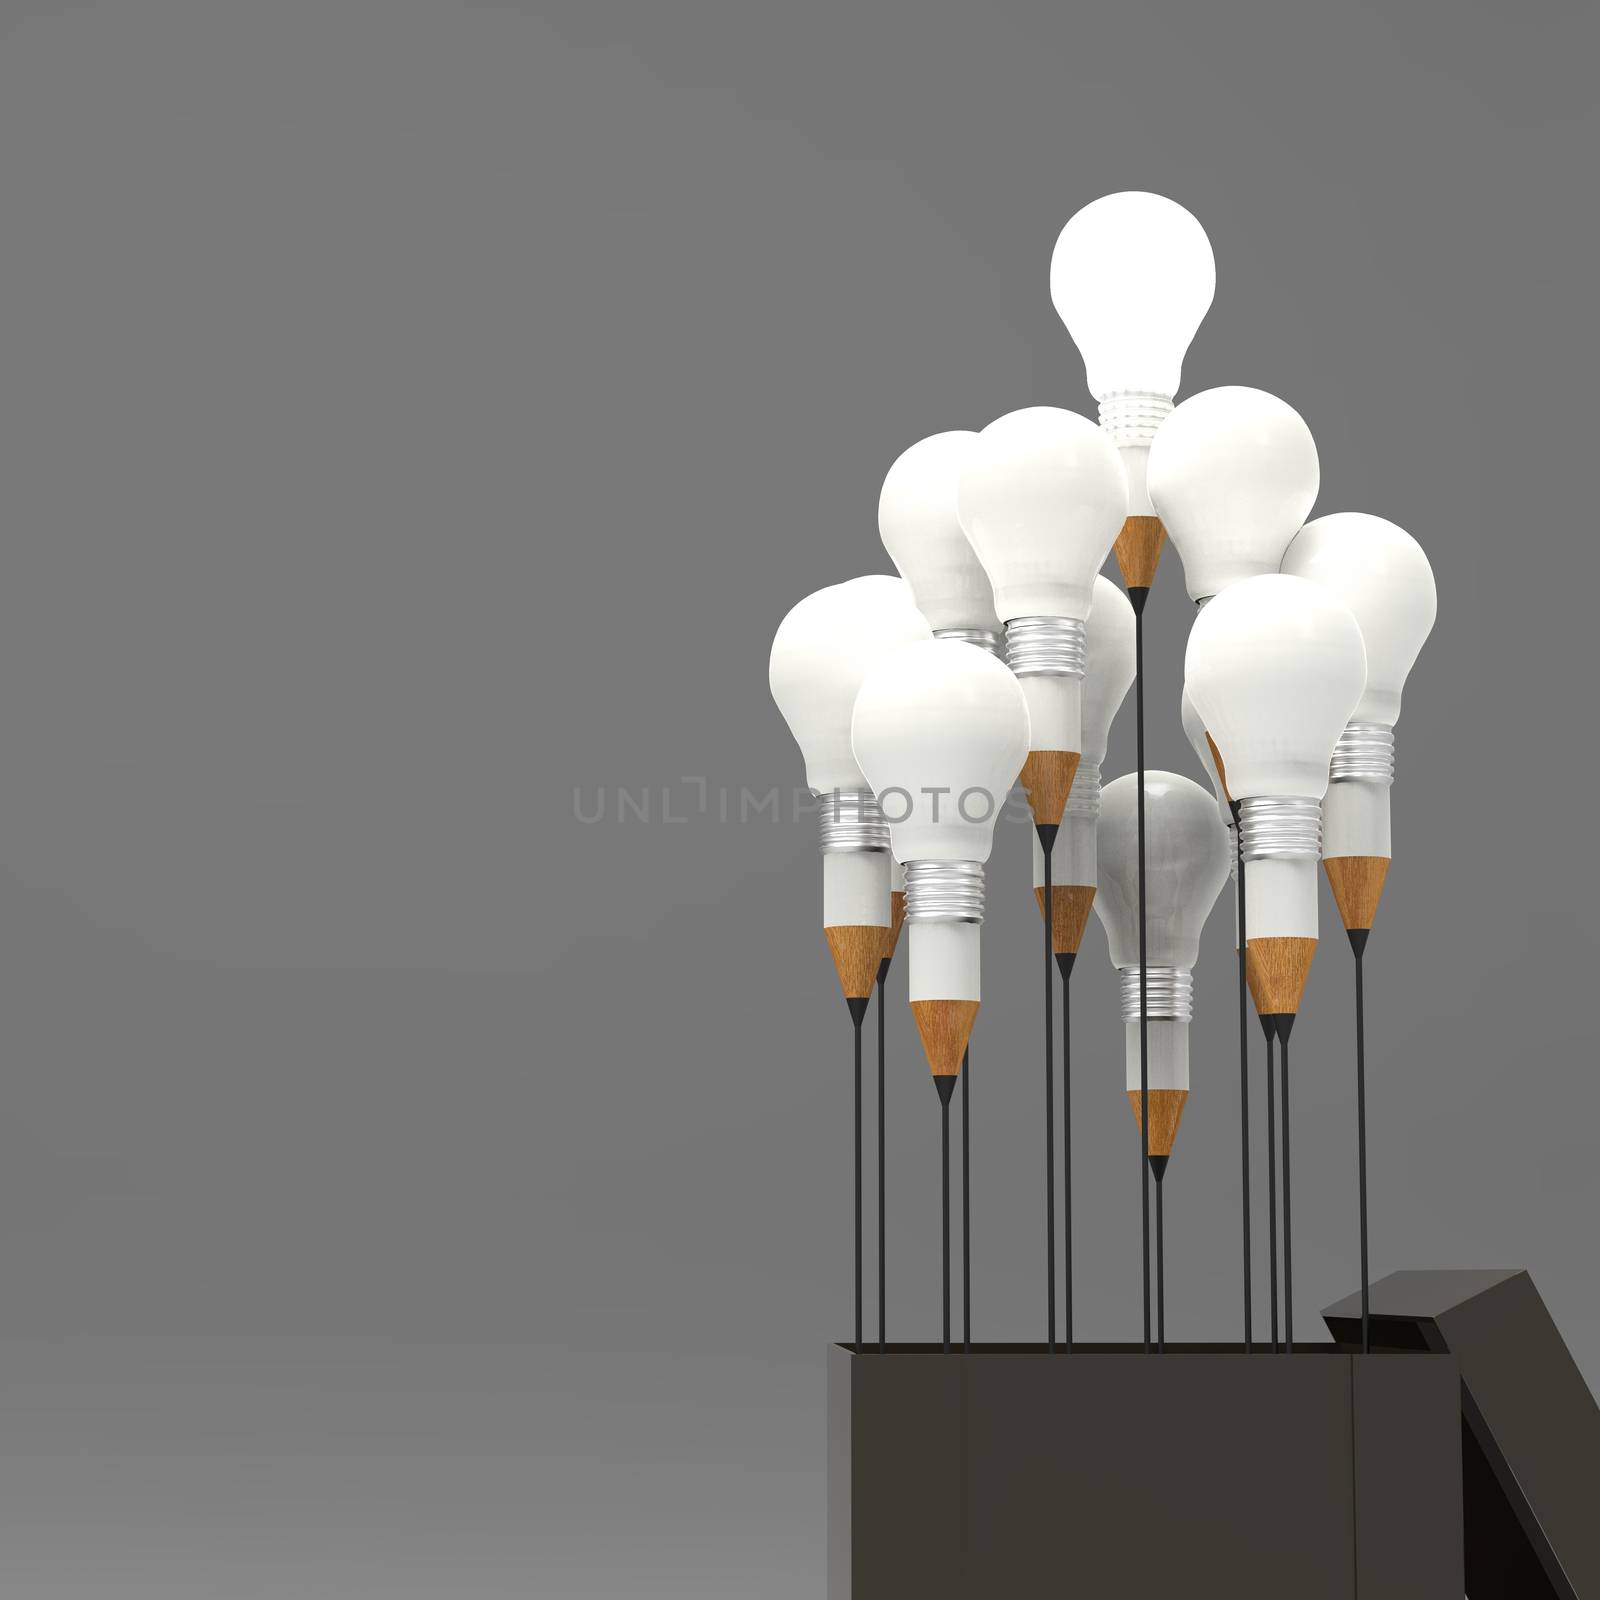 drawing idea pencil and light bulb concept outside the box as cr by everythingpossible